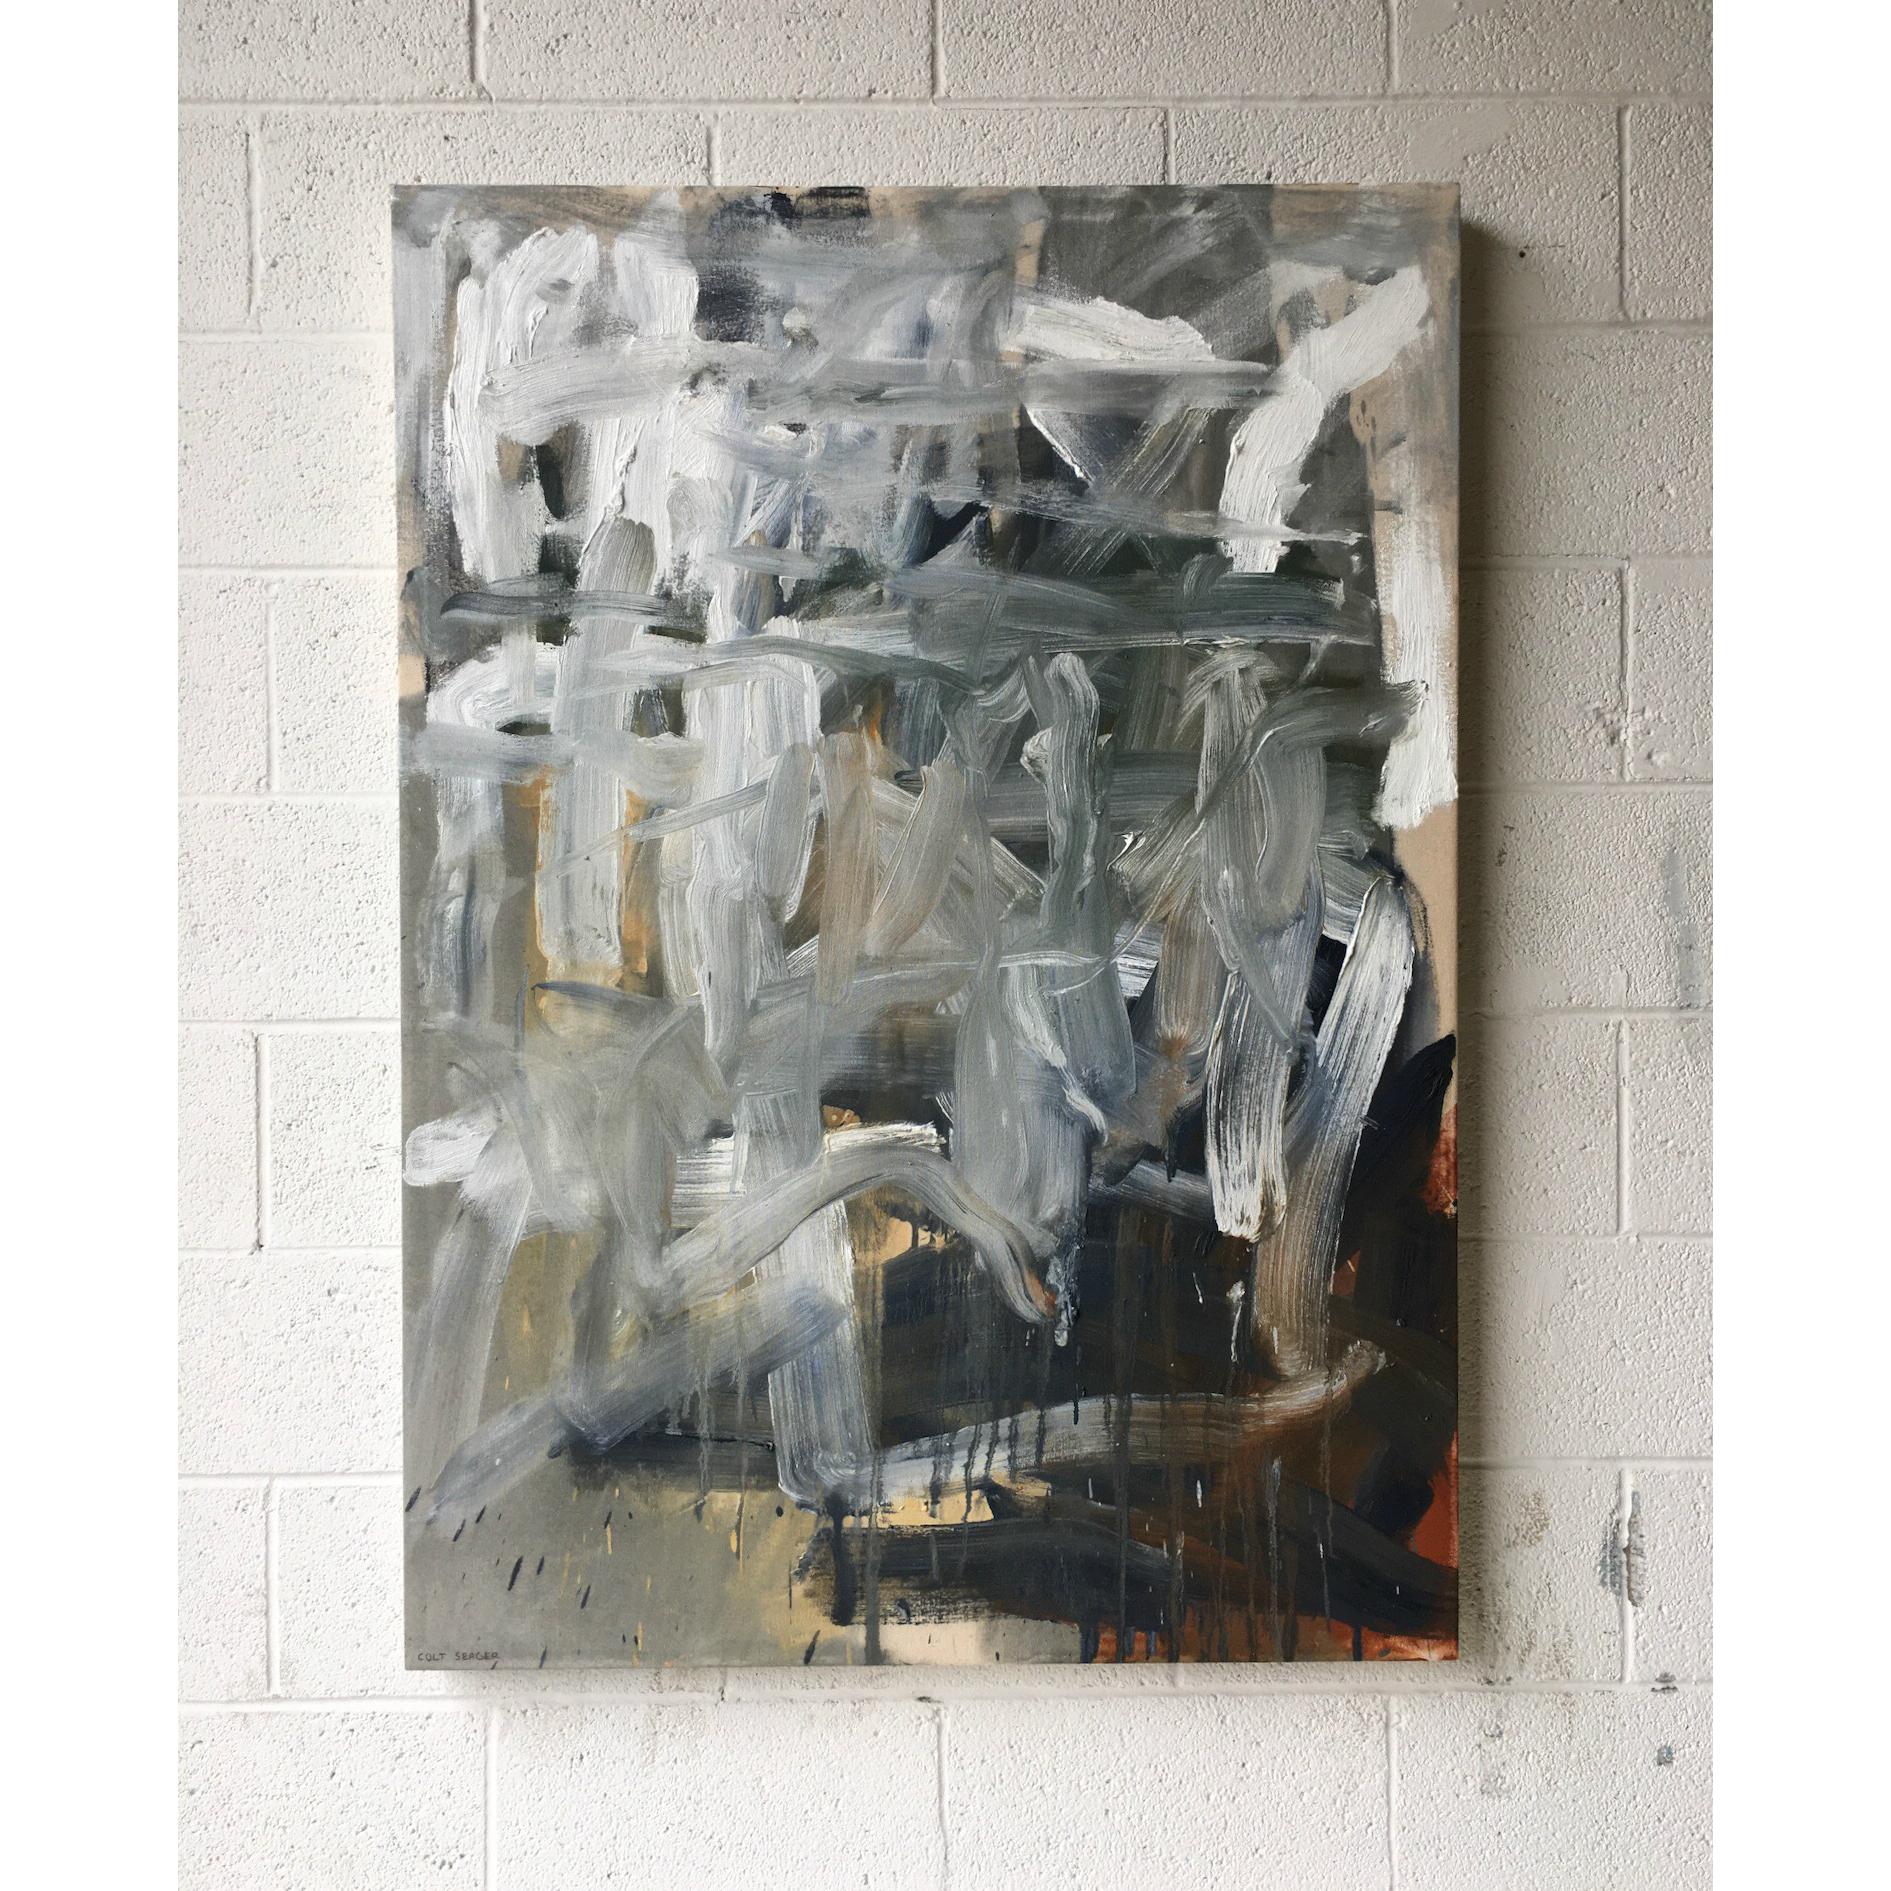 Oil on canvas.

Colt Seager is an internationally recognized artist who resides in the suburbs of Chicago. Working primarily in the mediums of painting and sculpture, his art seeks to invite others into a holy space, encouraging them to explore